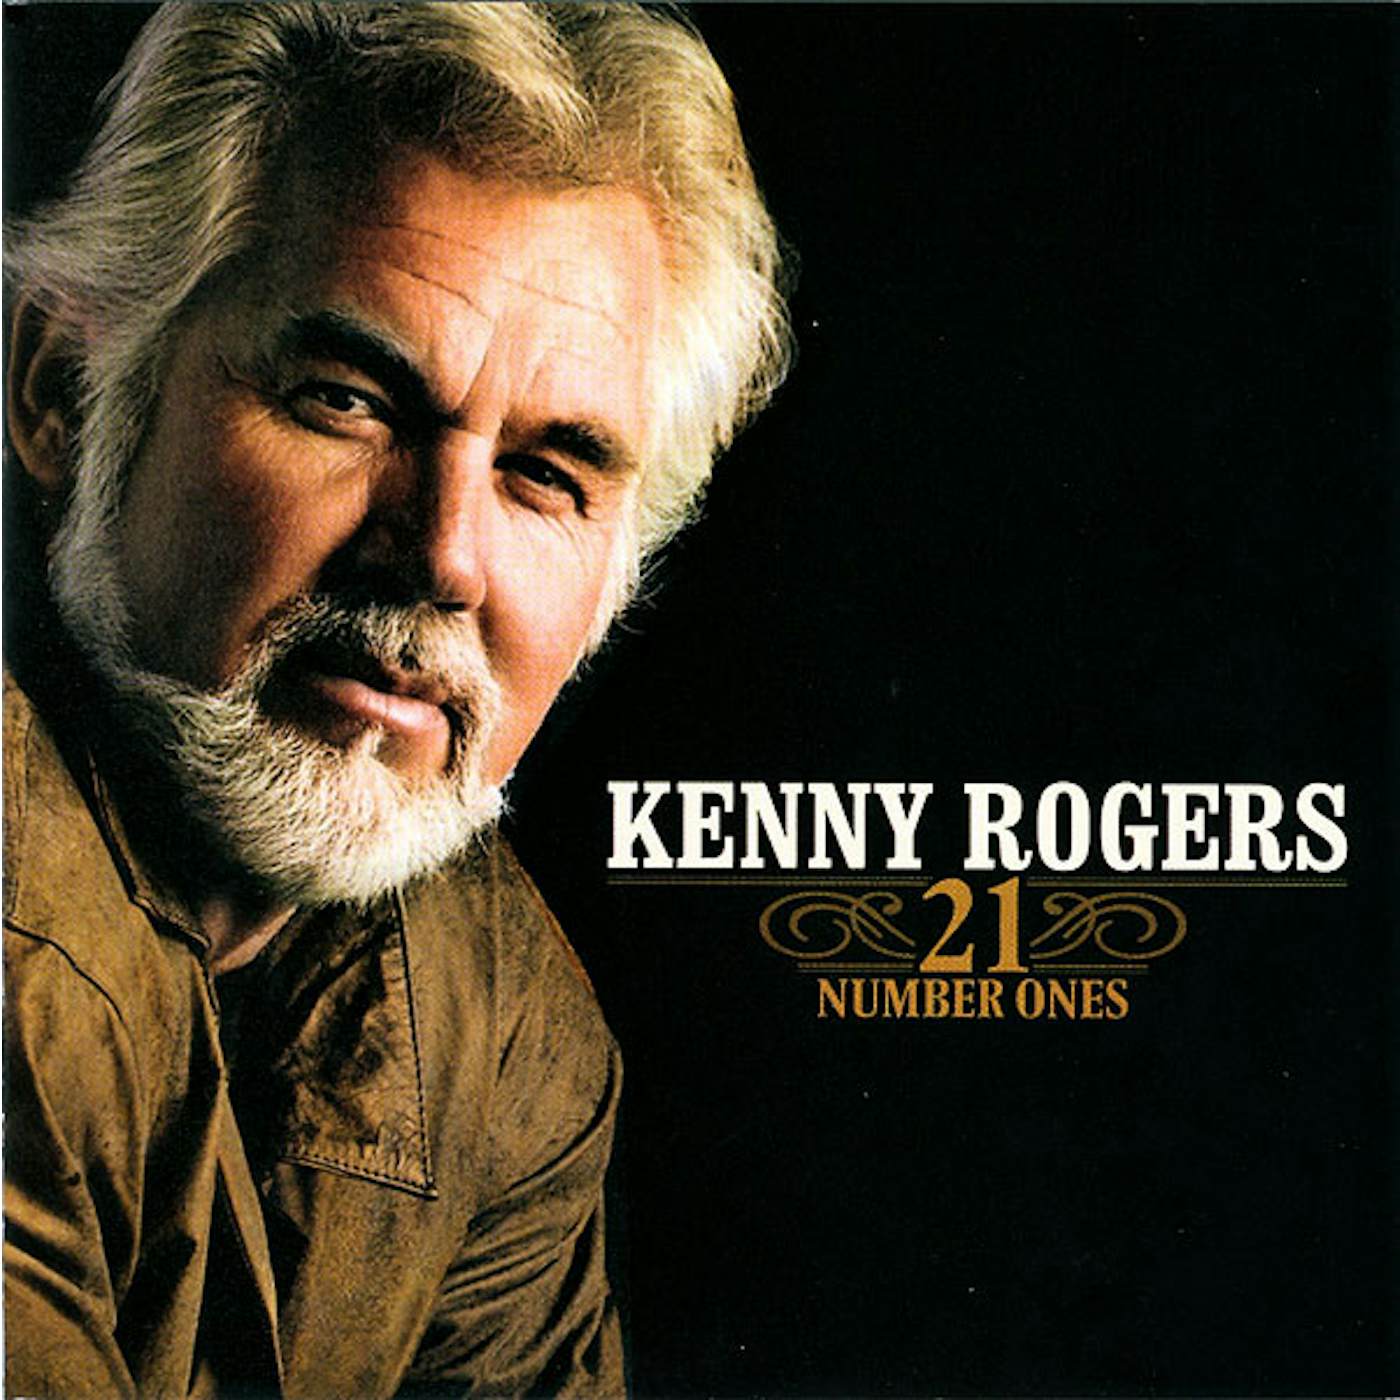 Kenny Rogers 21 Number Ones Vinyl Record